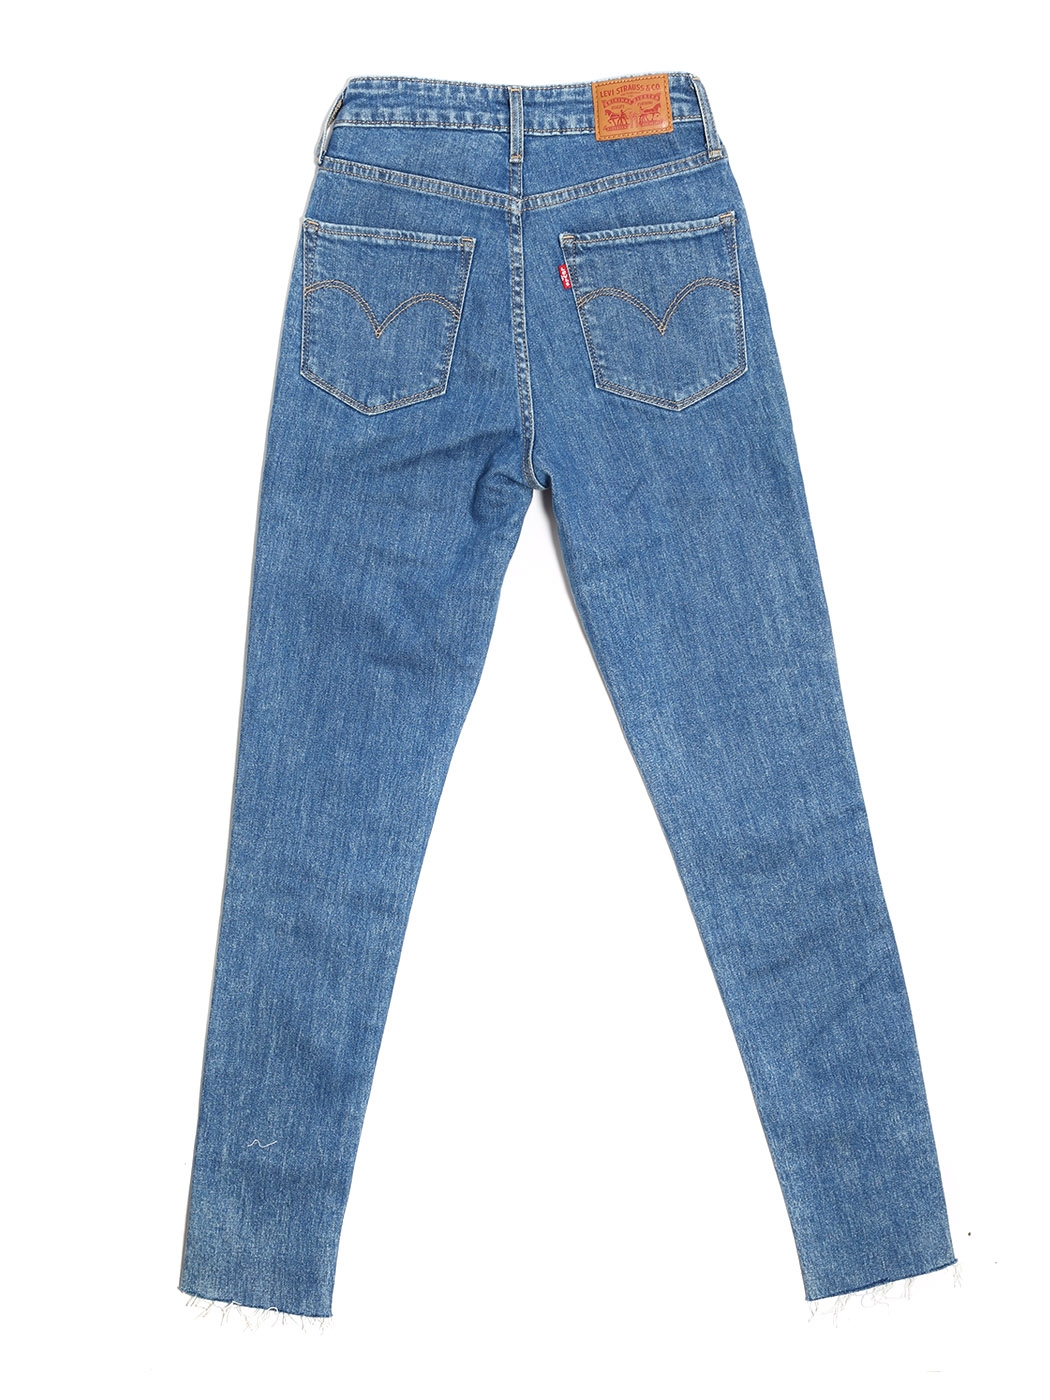 Subjectief winkel Edelsteen Boutique LEVIS 721 High rise skinny slim fit blue jeans Retail price €110  Size 26 (XS)